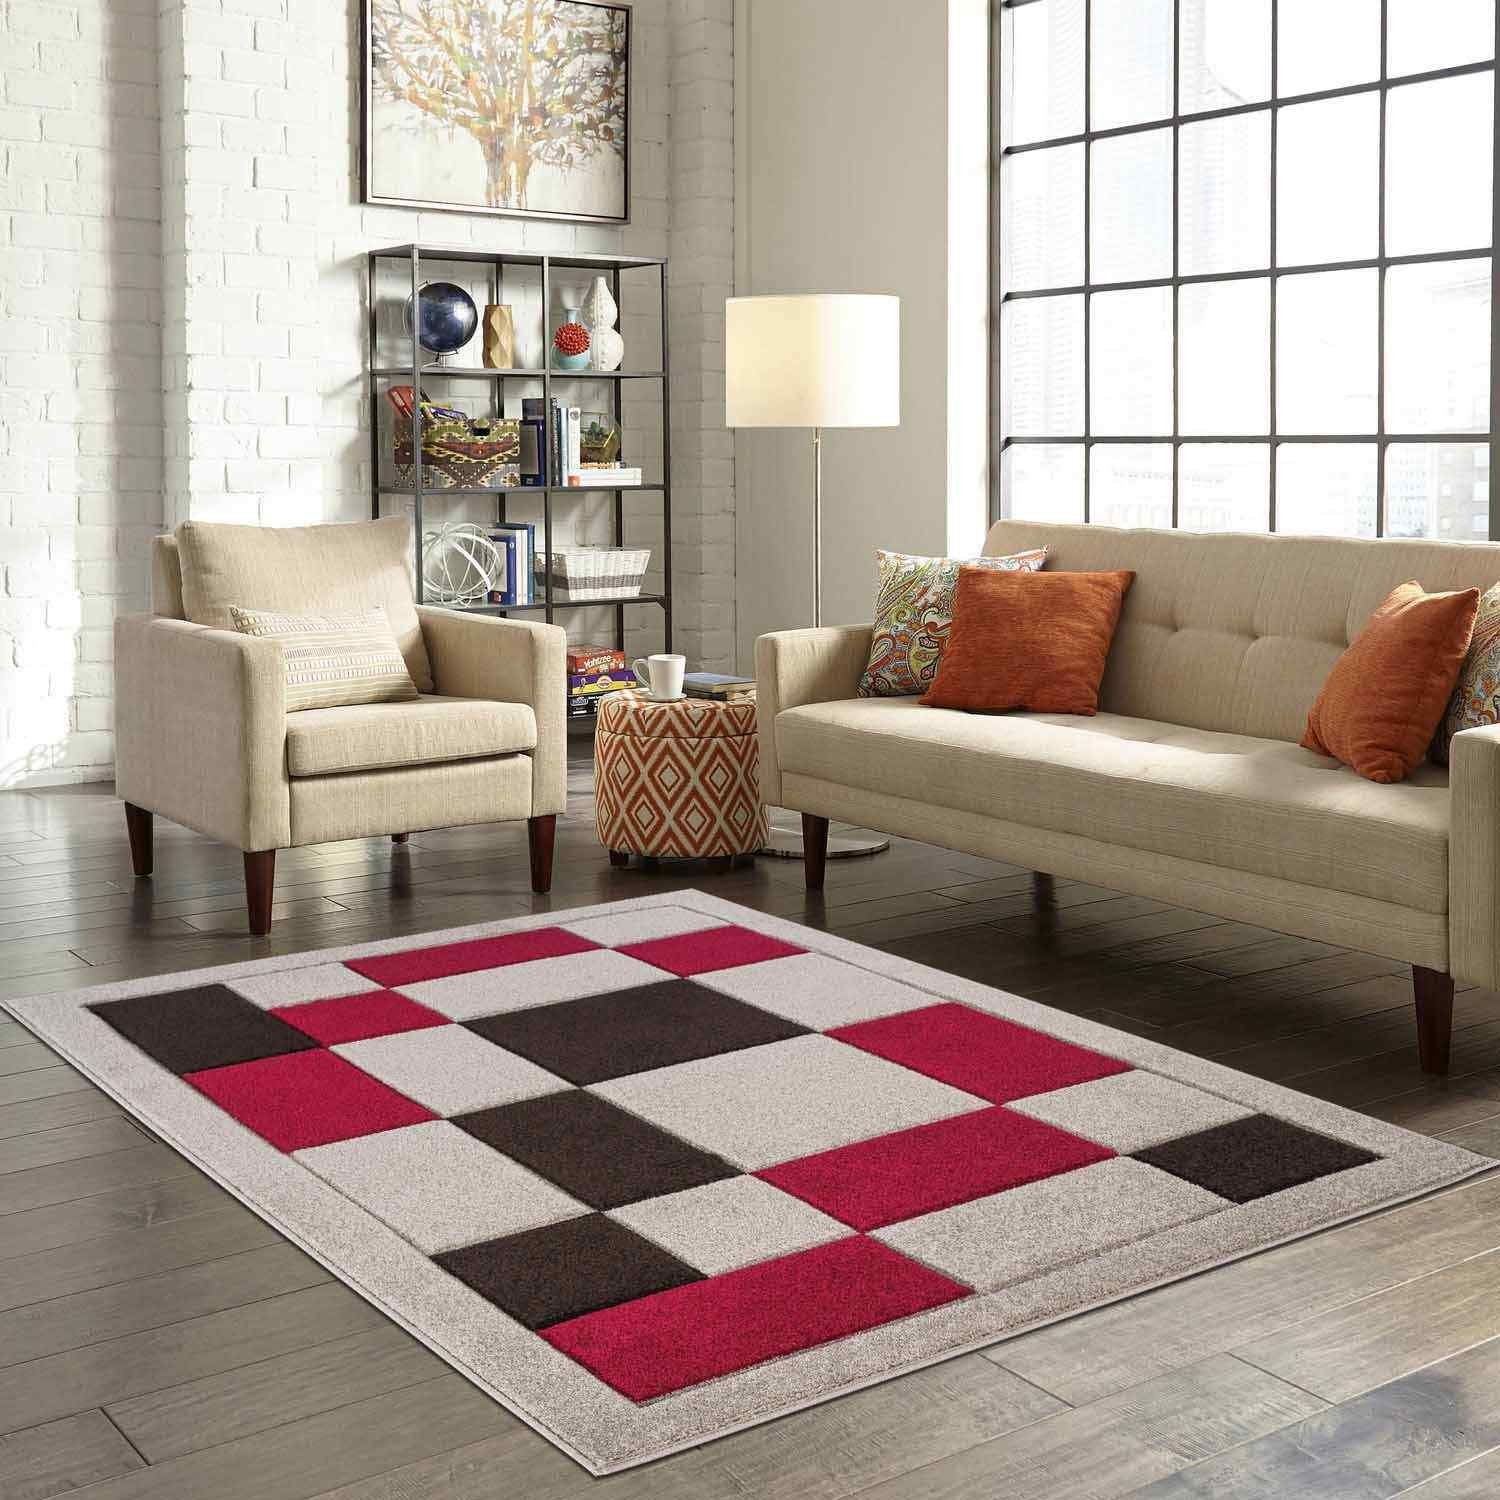 Areas Rugs